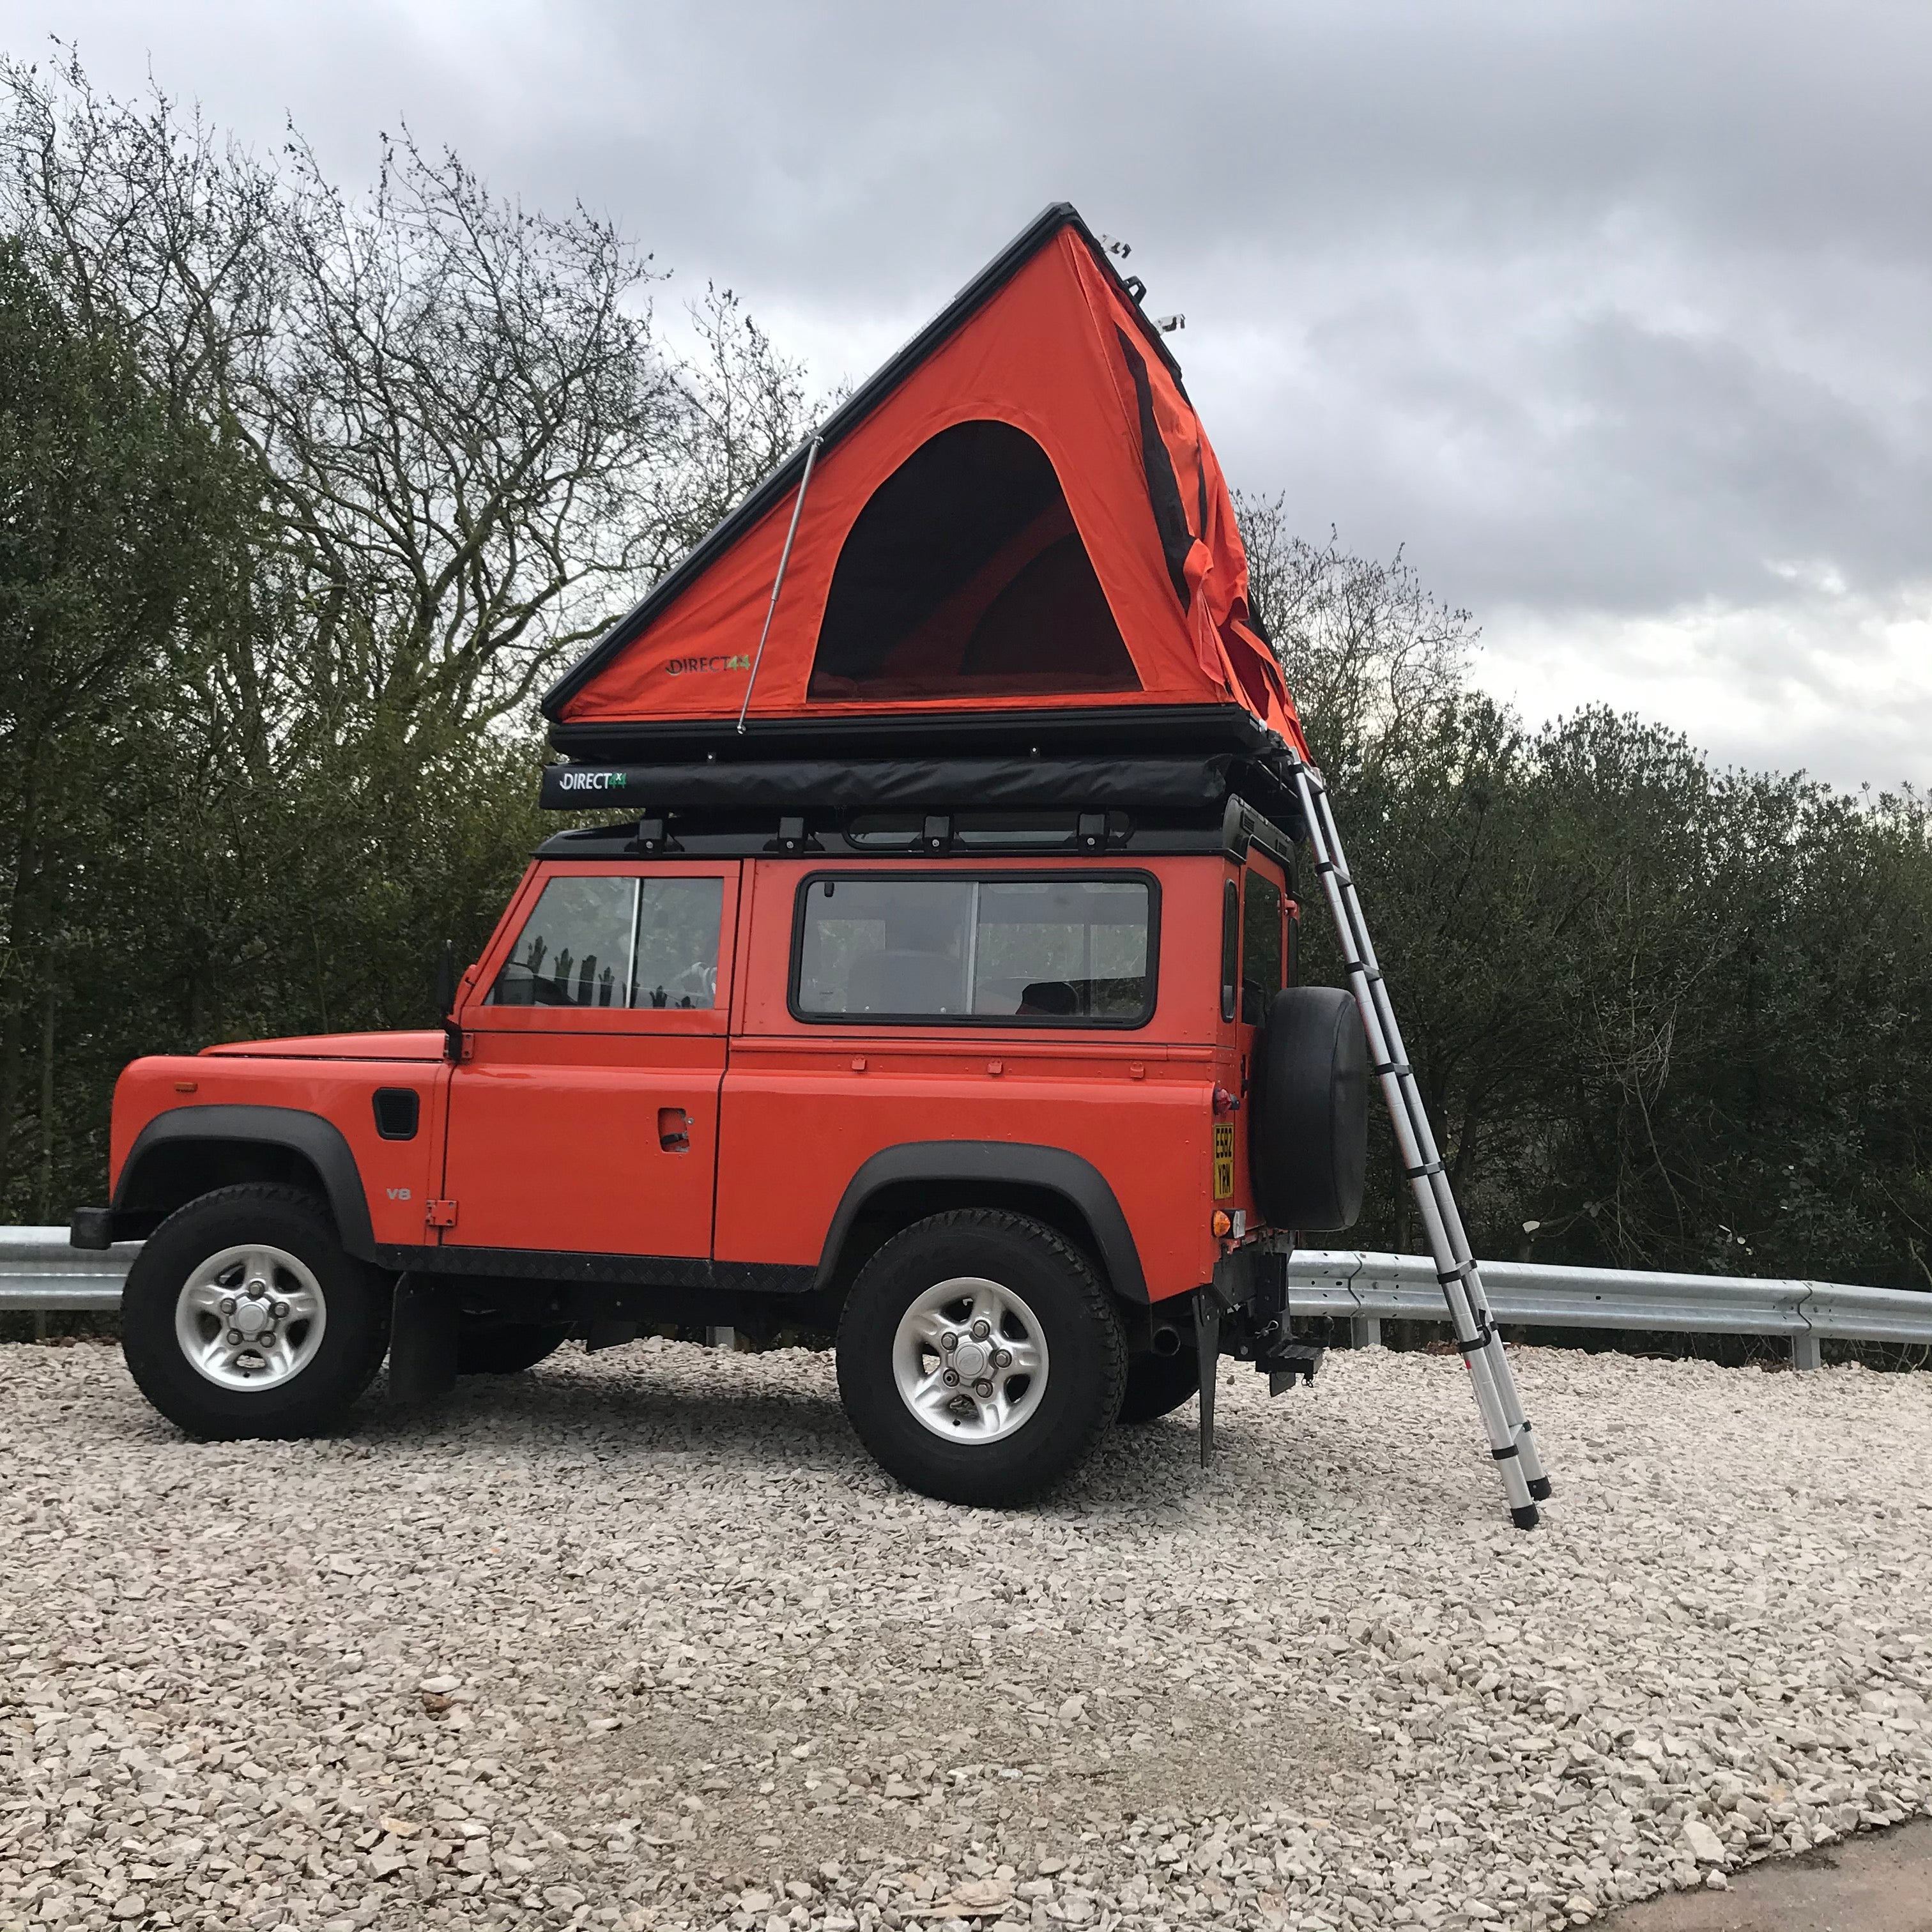 Which Direct4x4 Expedition Roof Camping is for You?